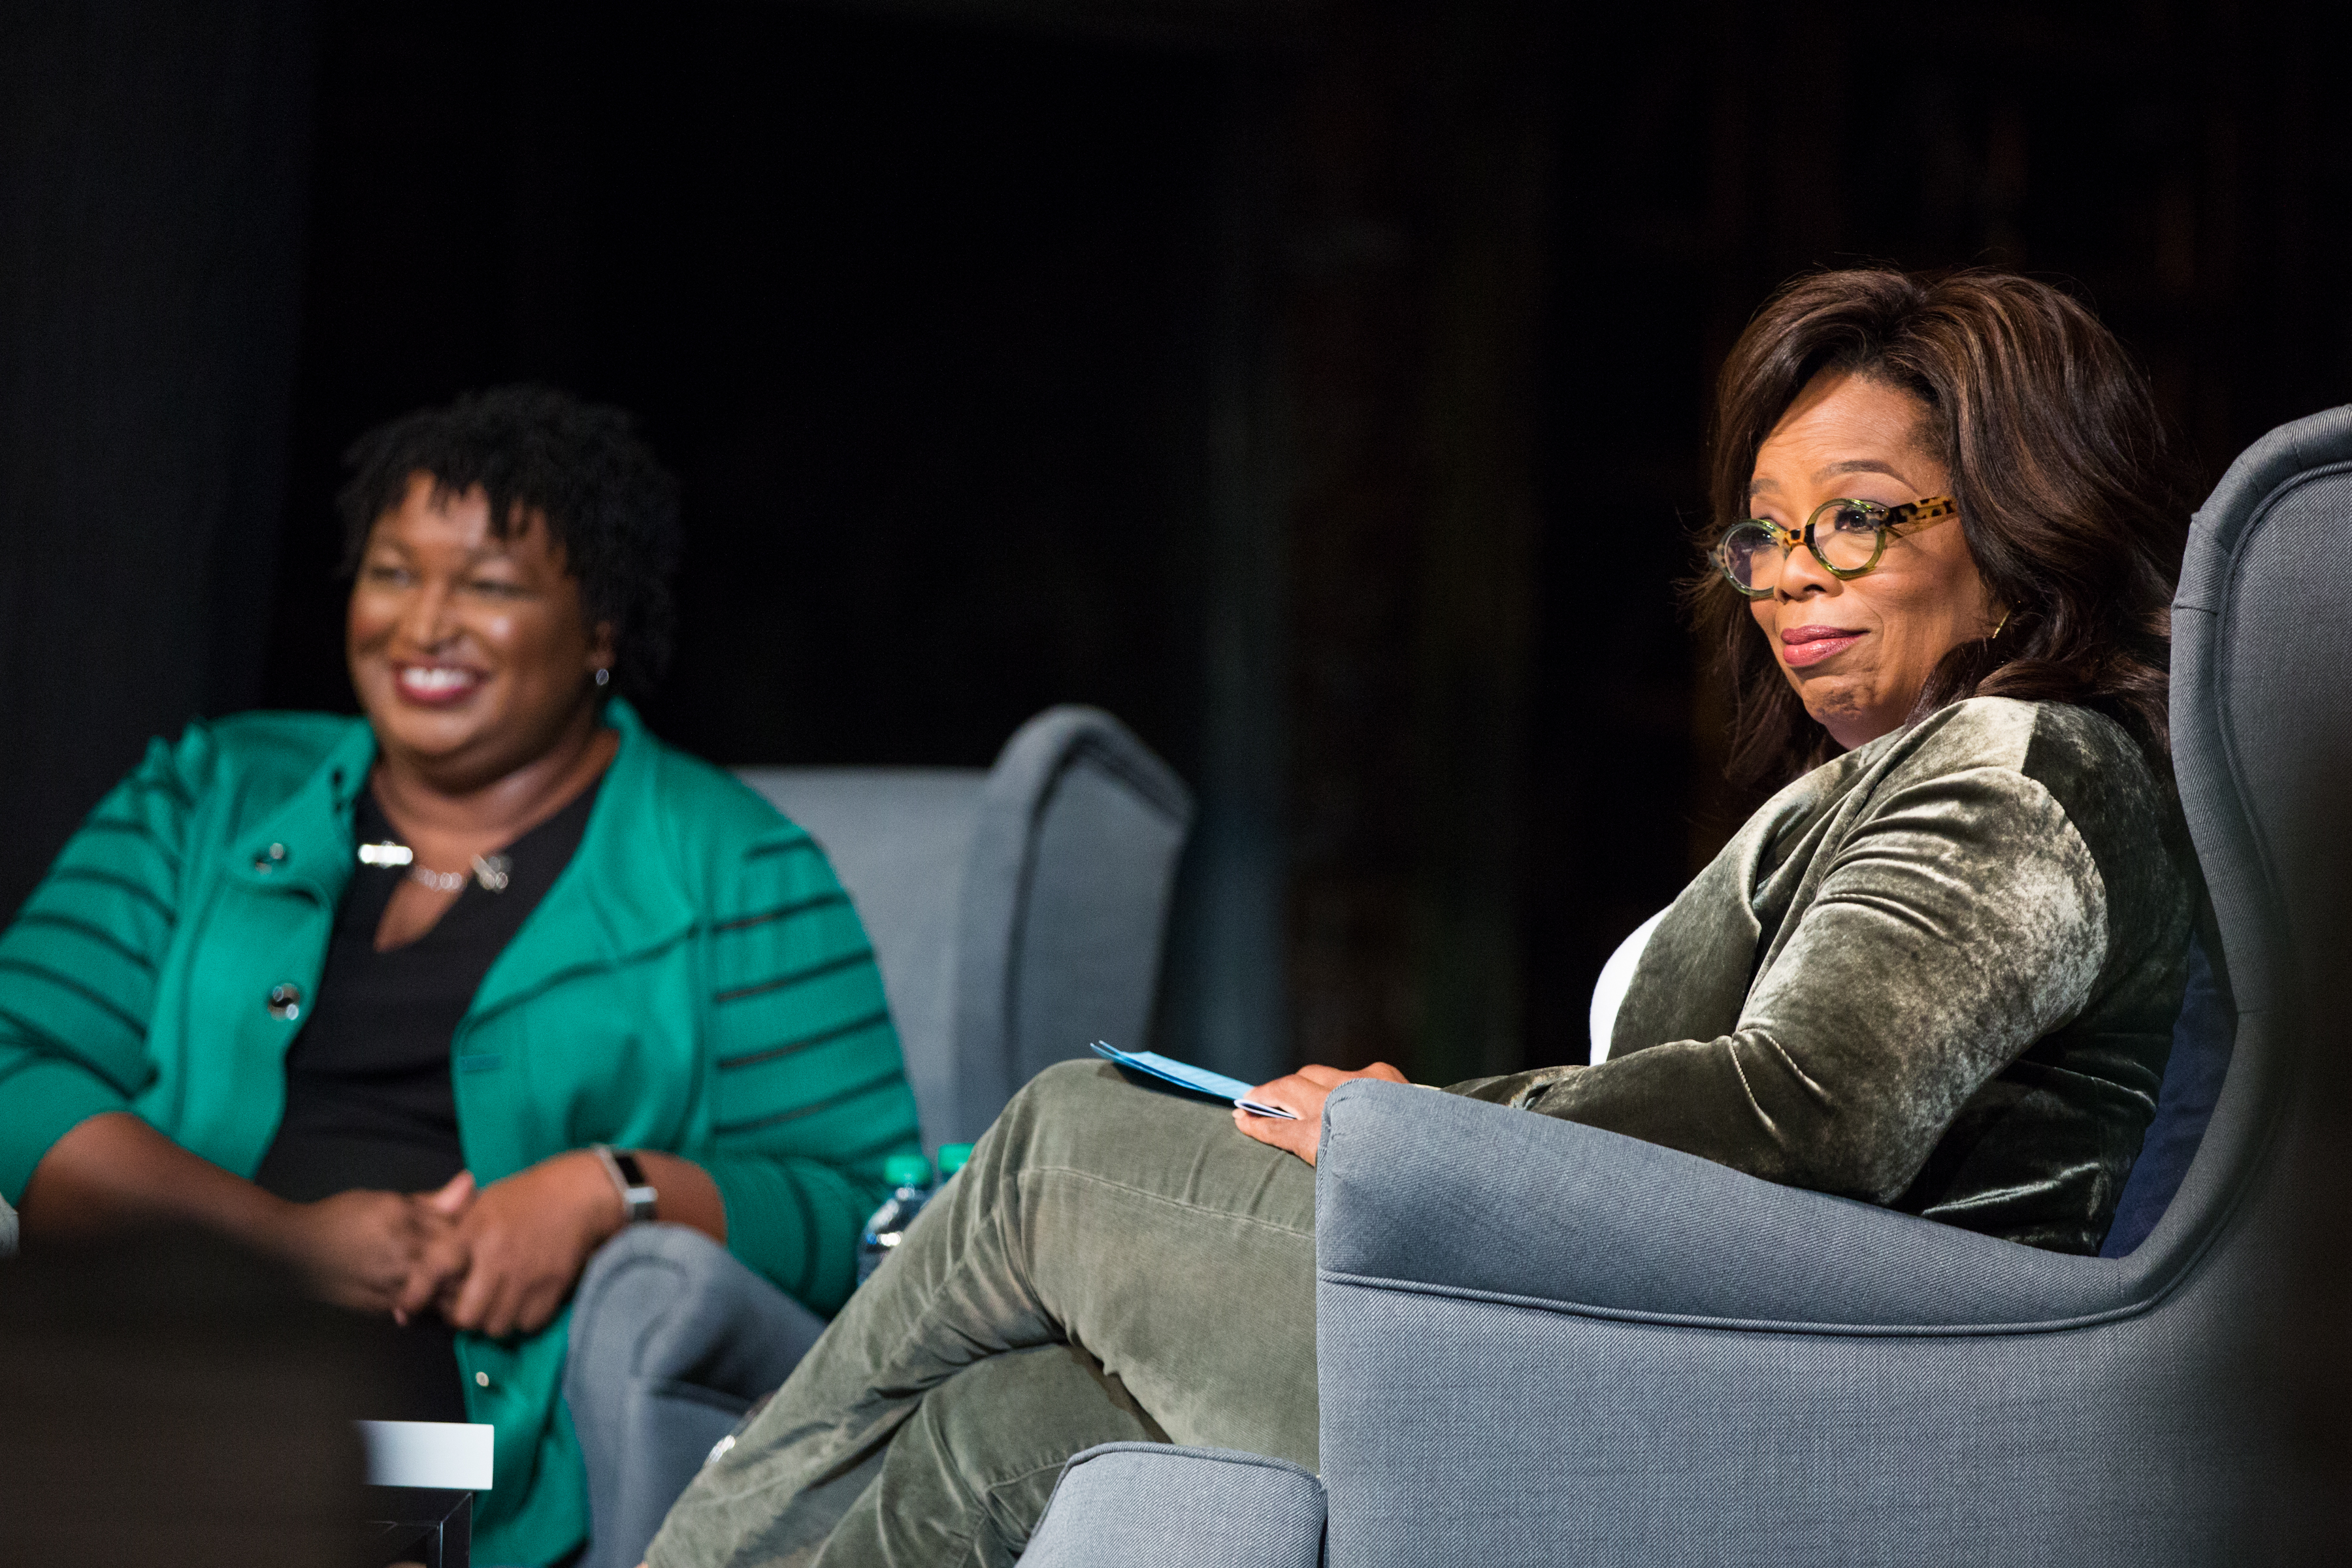 Oprah Winfrey interviews Georgia Democratic Gubernatorial candidate Stacey Abrams in front of an audience during a town hall style event at the Cobb Civic Center on November 1, 2018 in Marietta, Georgia. Jessica McGowan/Getty Images